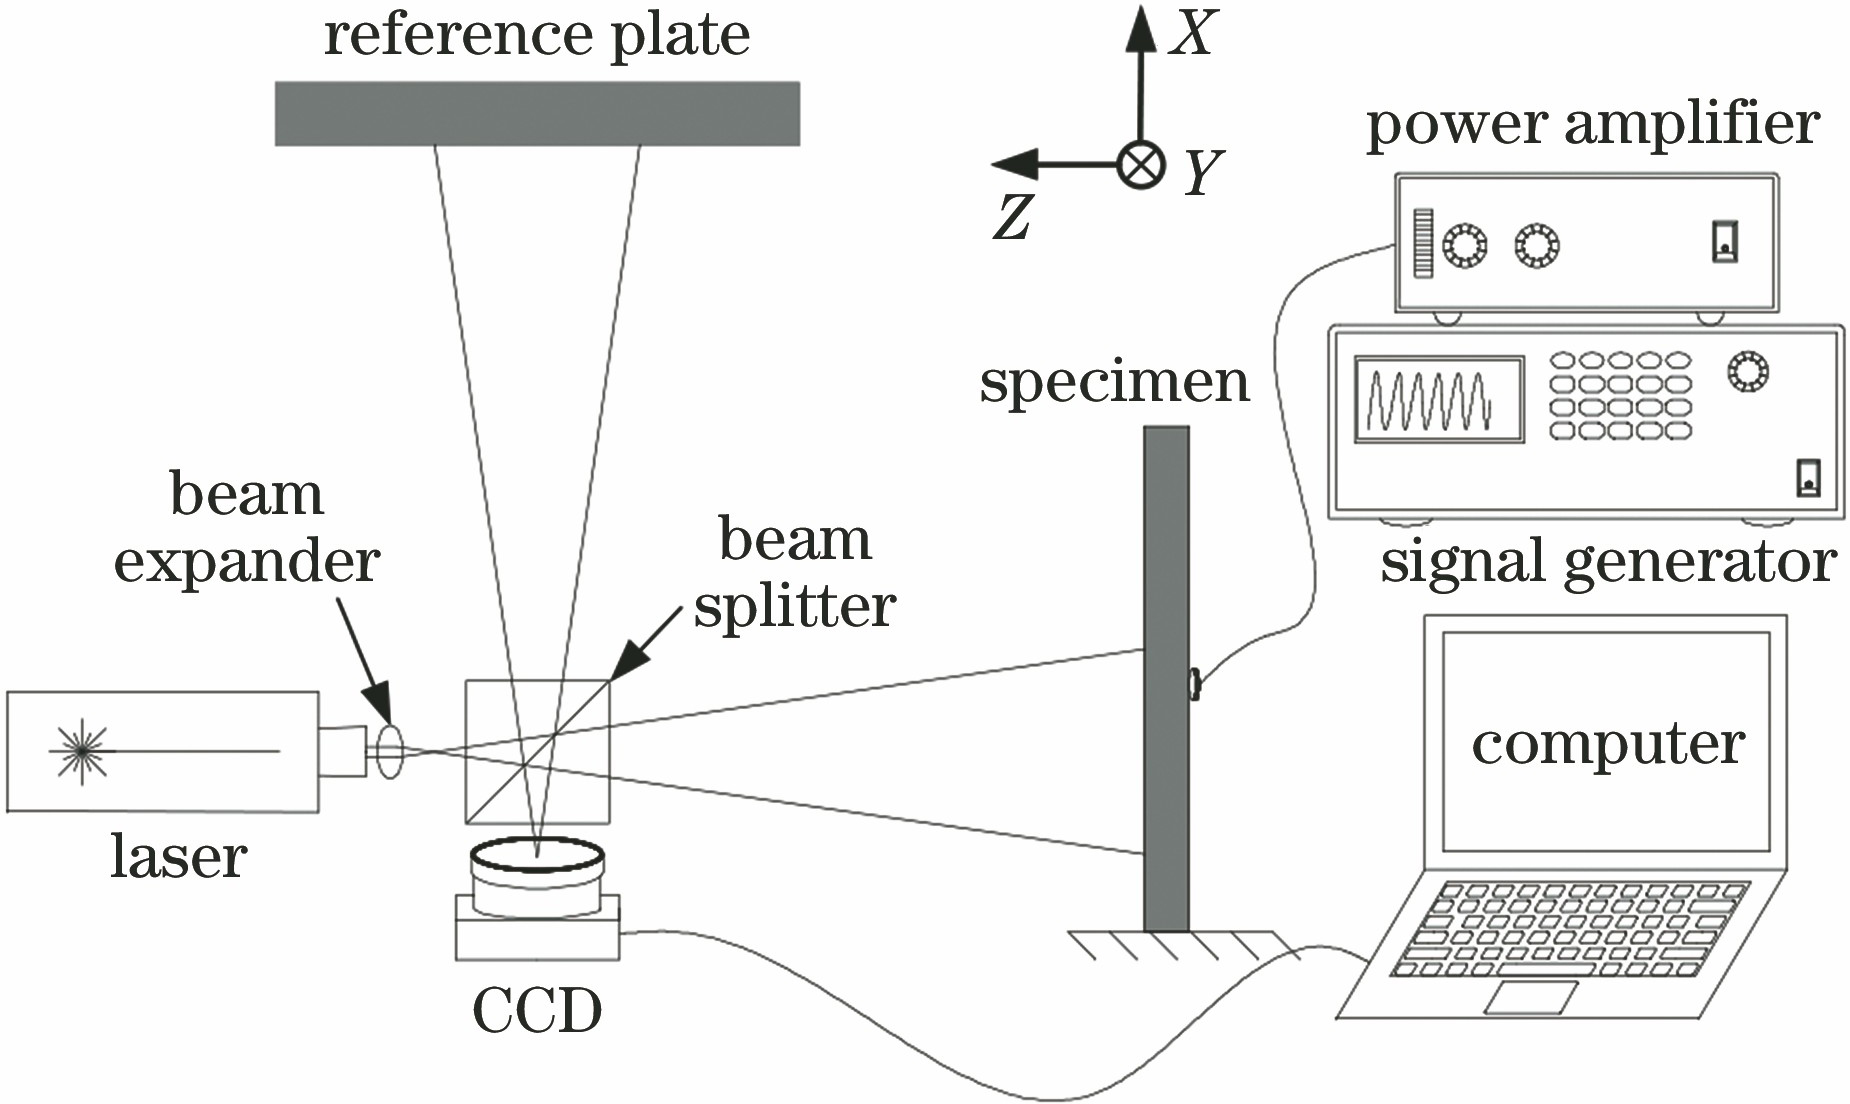 Schematic of out-of-plane movement detection system